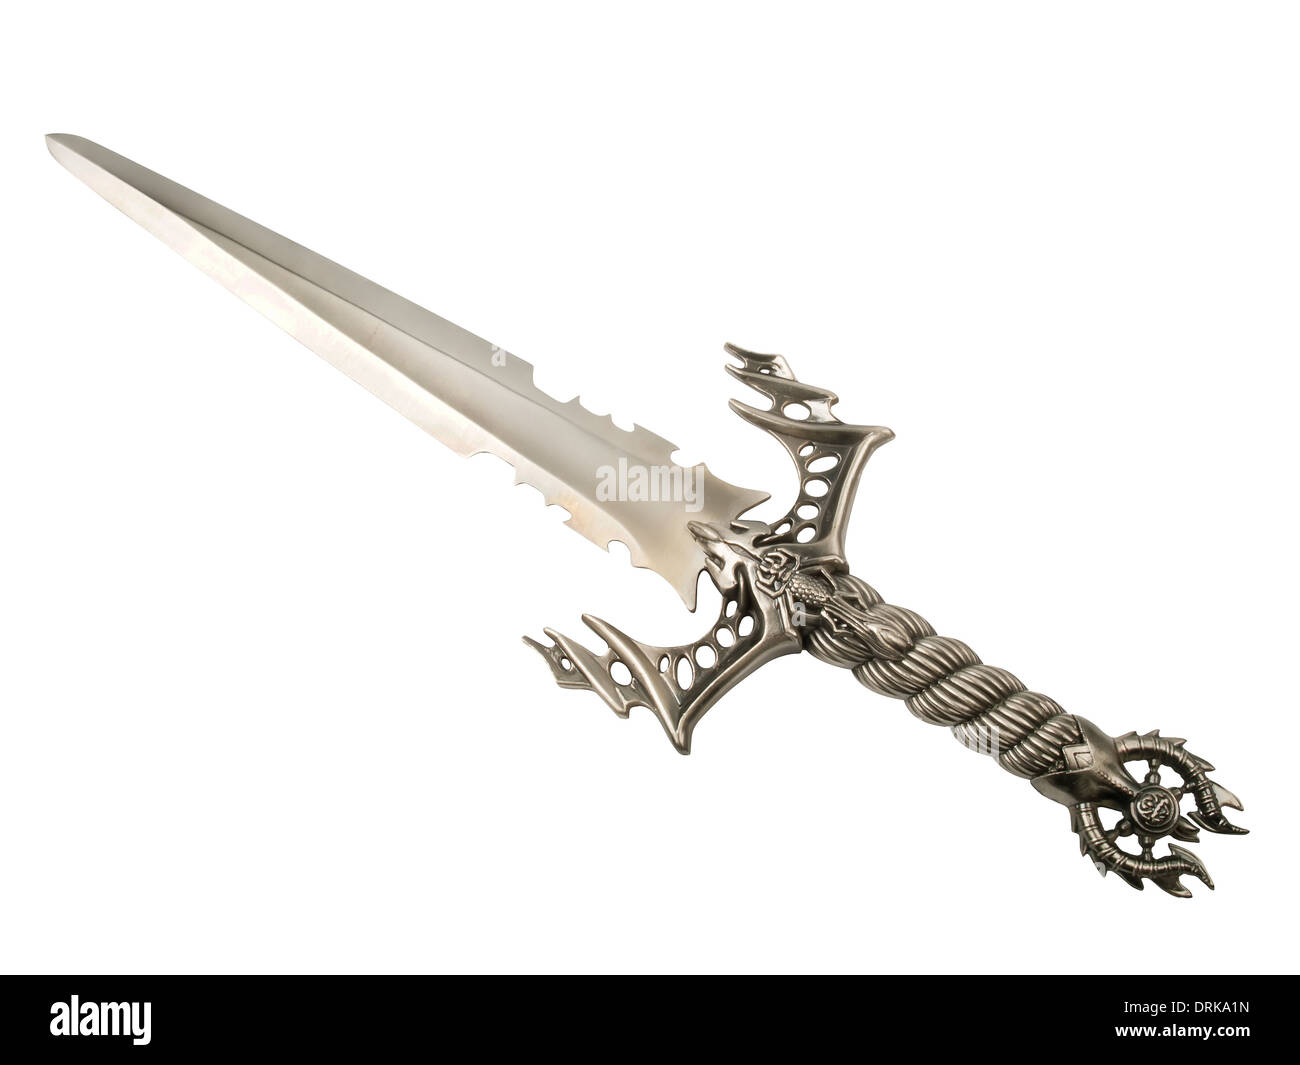 steel ornate sword isolated on white background Stock Photo